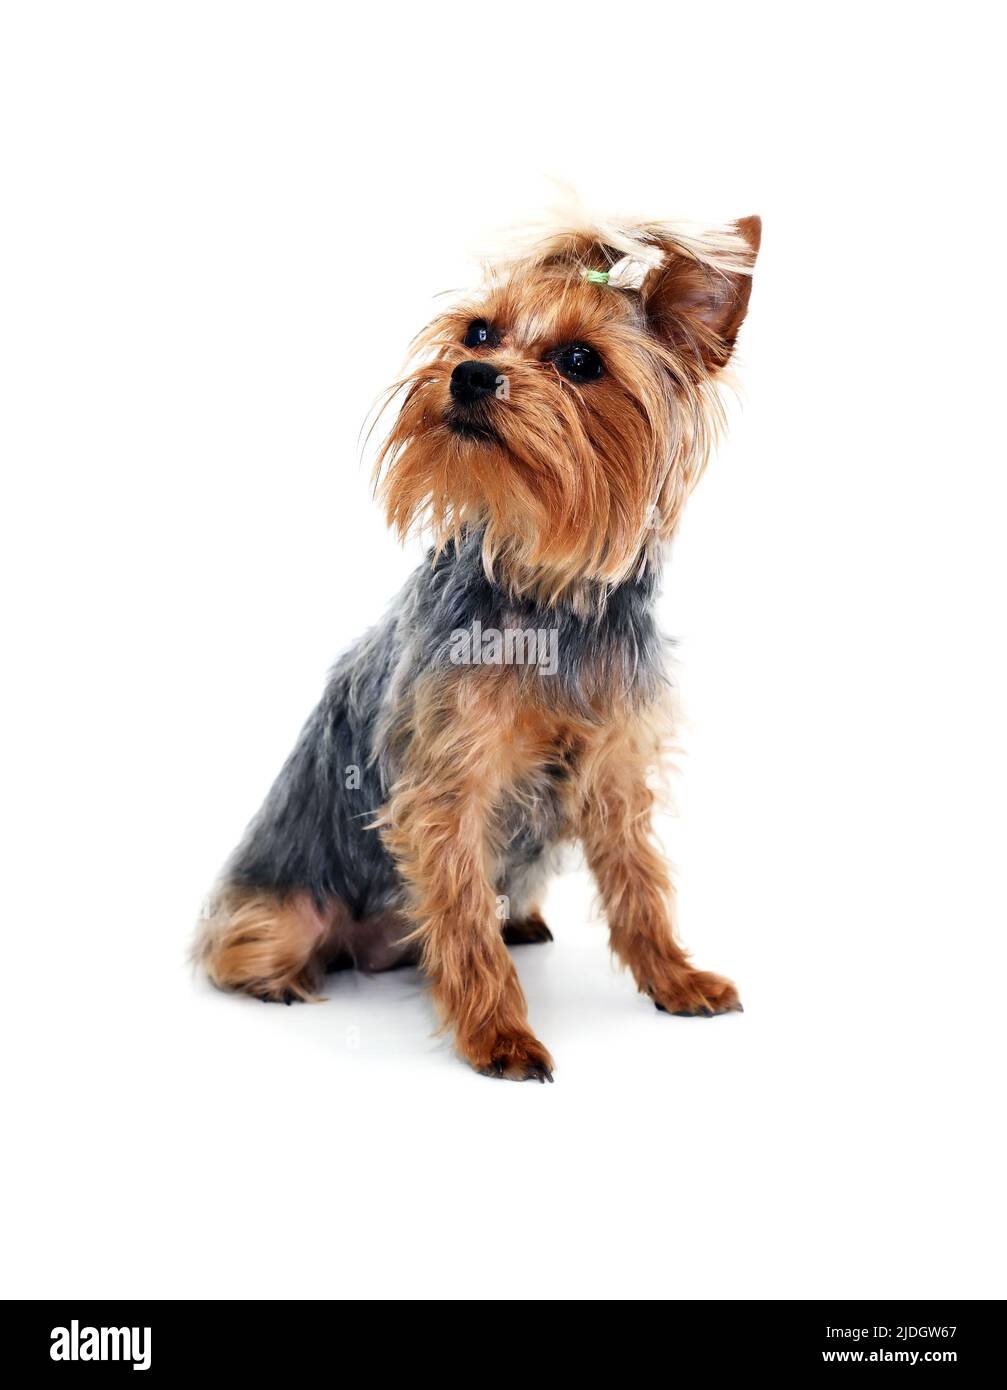 Alone funny puppy yorkshire terrier on white background Stock Photo